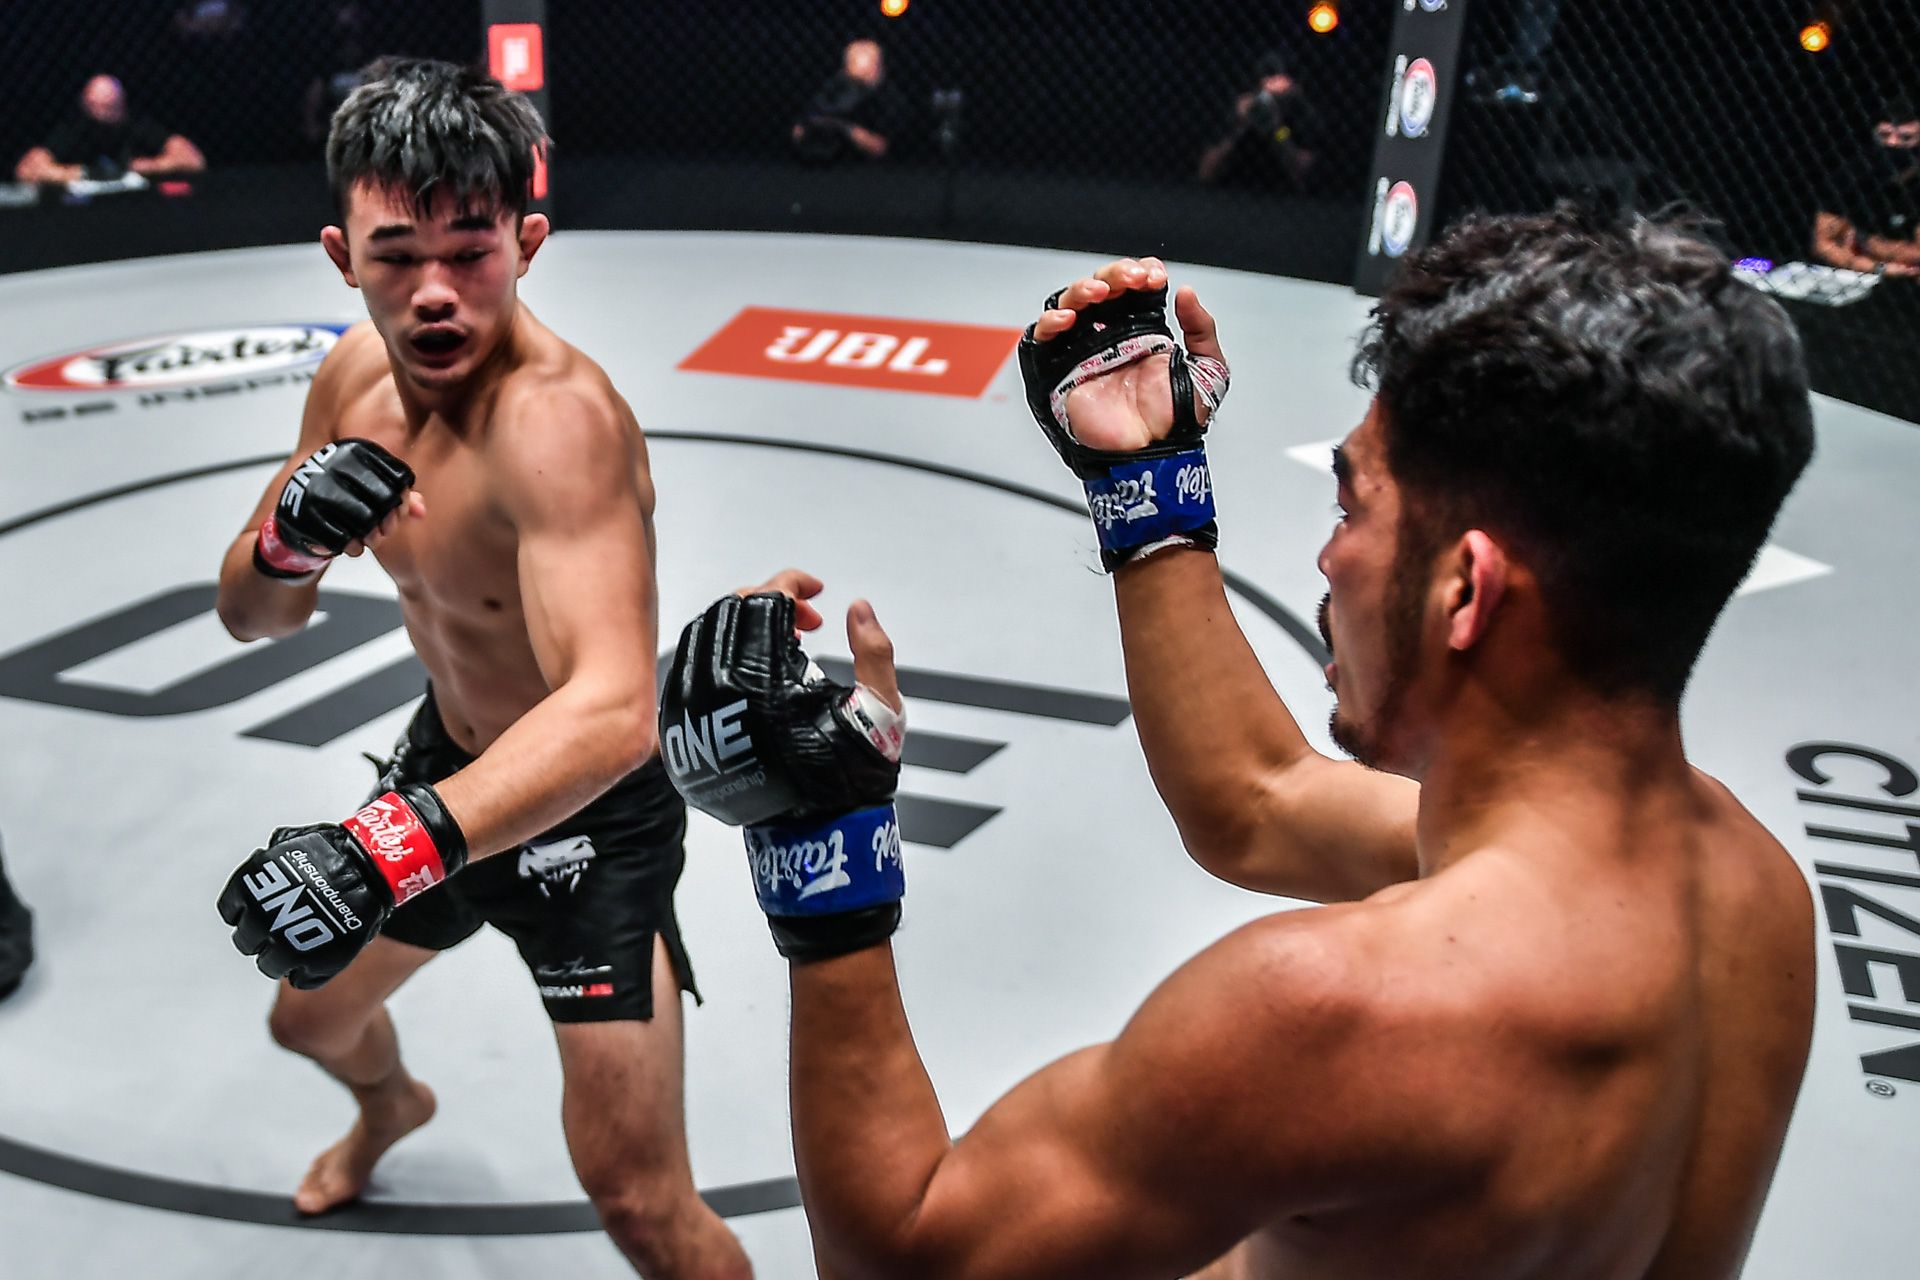 Christian Lee in the Circle ONE Championship